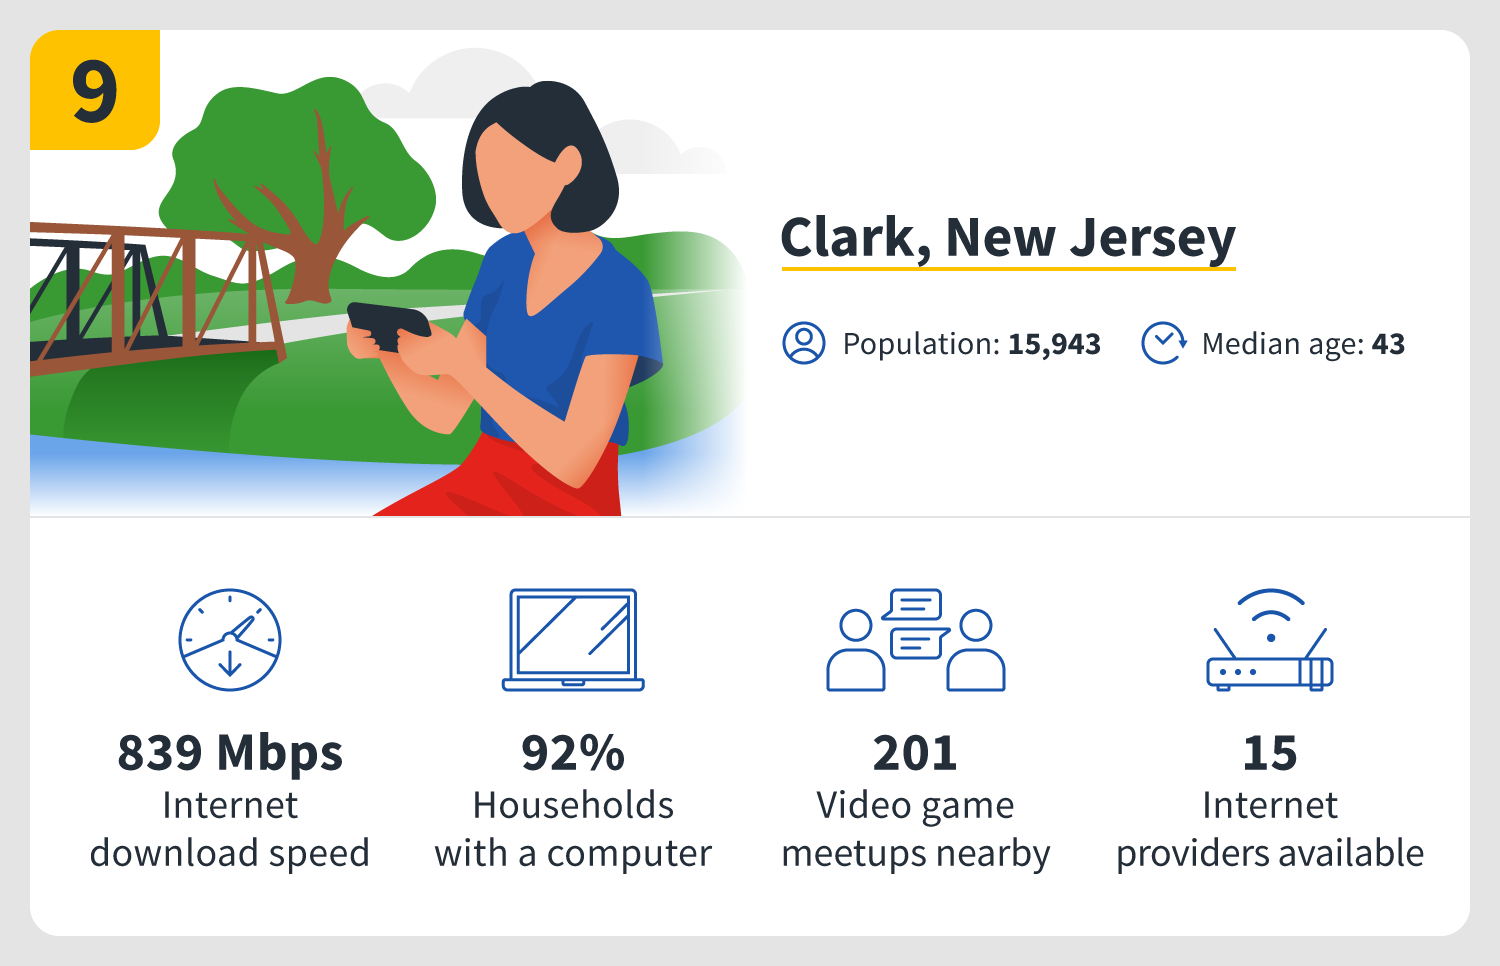 Clark, New Jersey, is the ninth best city for gaming in the U.S.